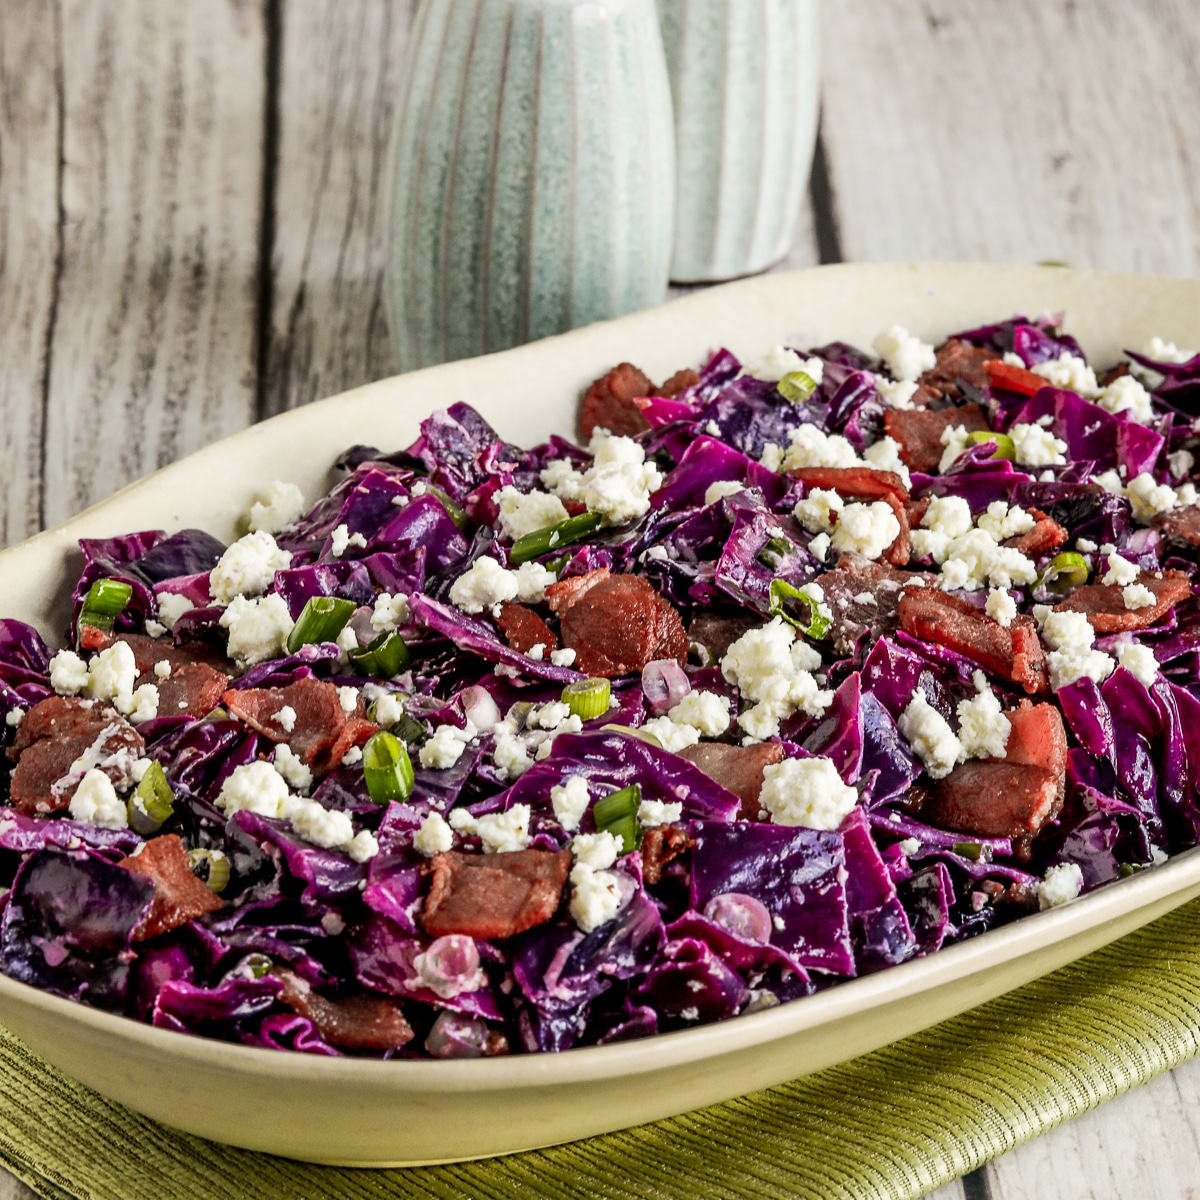 Square image of Red Cabbage Salad with Bacon and Goat Cheese shown on serving plate